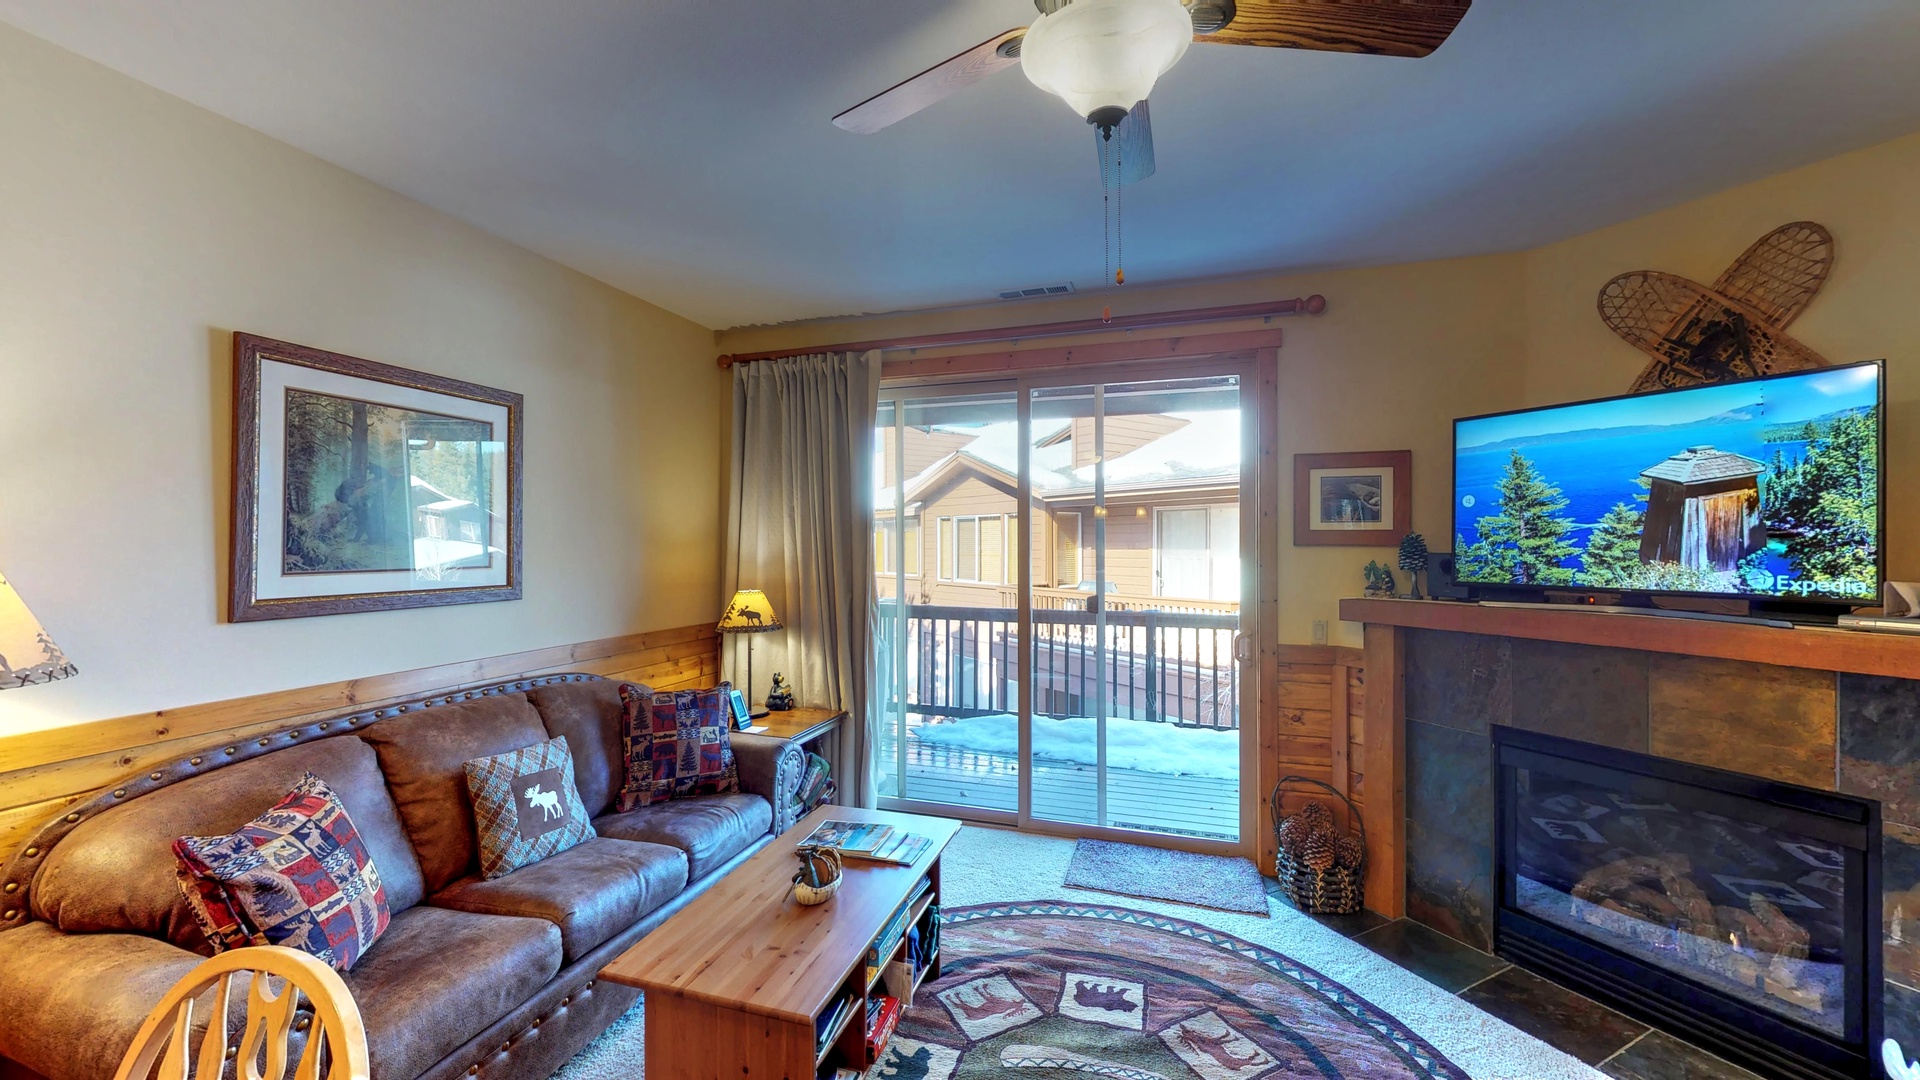 Living room with nearby kitchen and door to deck: Truckee Cinnabar Vacation Retreat